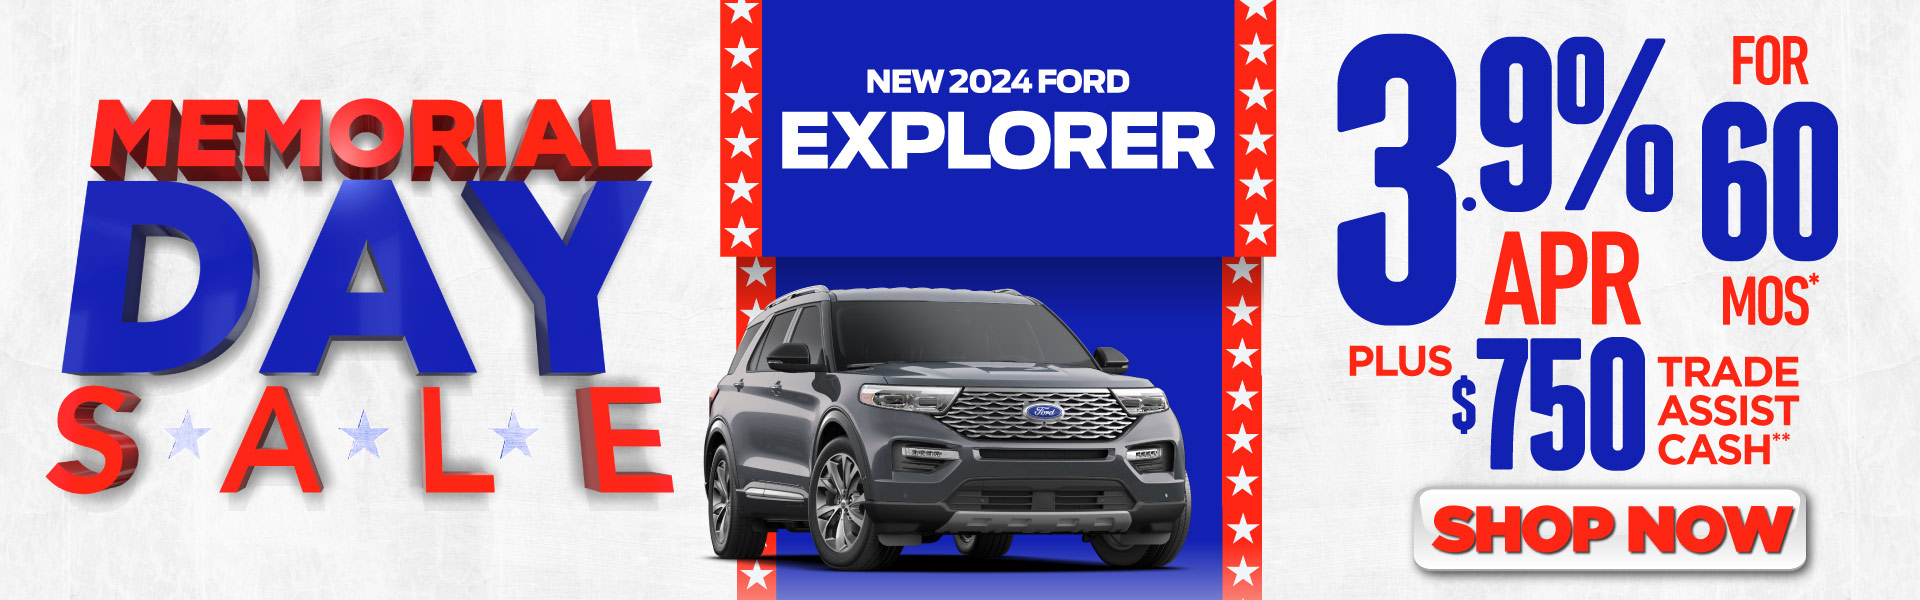 2023 ford explorer 0% apr for 72 months | act now